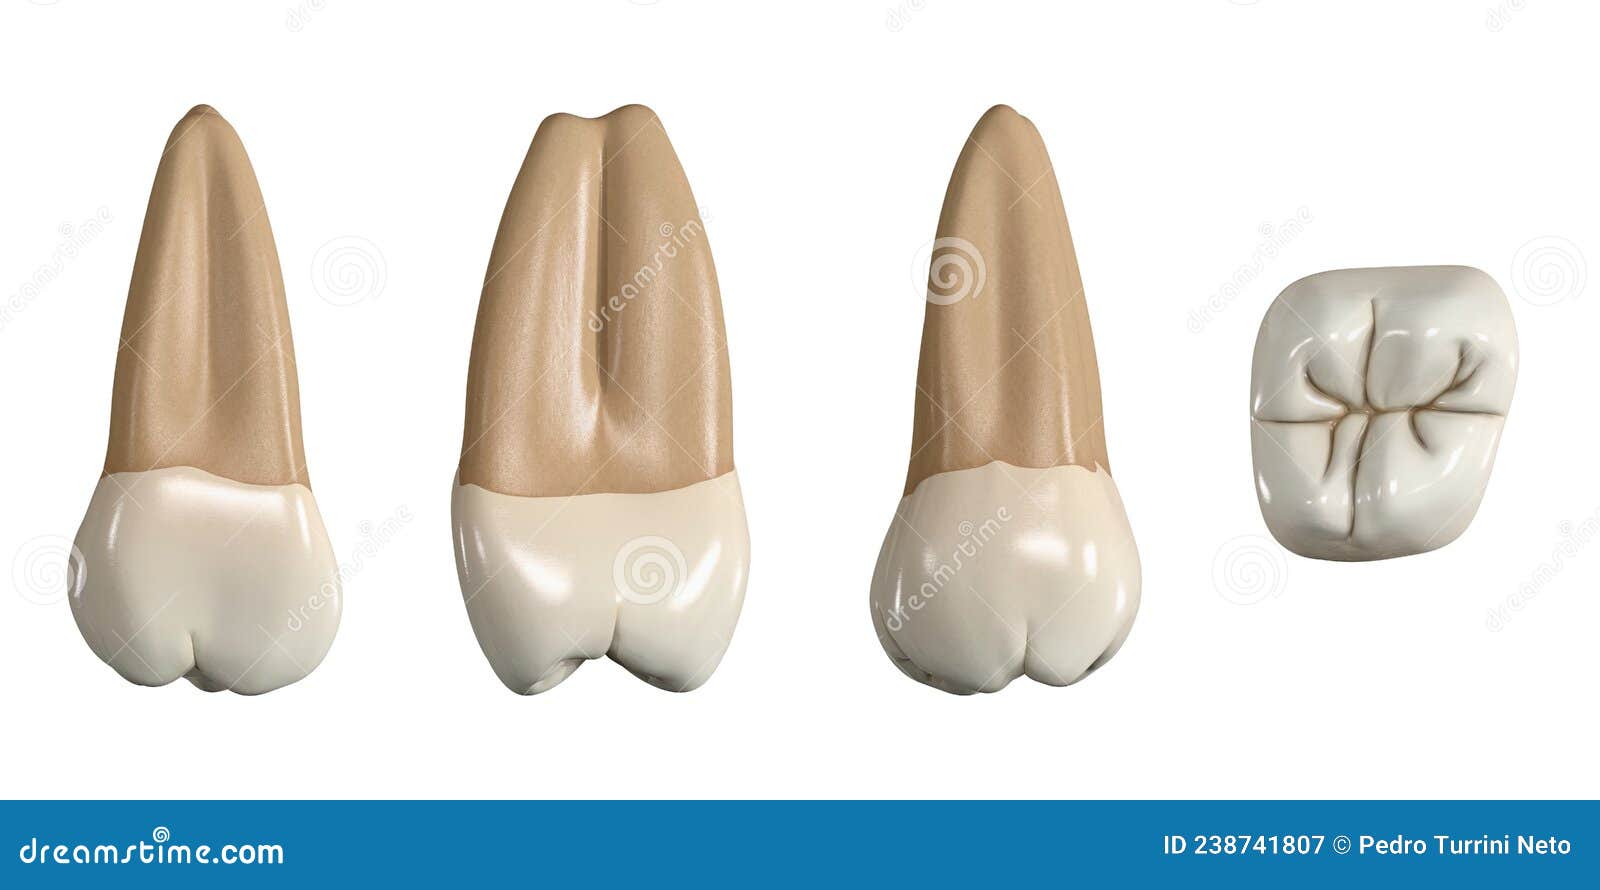 permanent upper third molar tooth. 3d  of the anatomy of the maxillary third molar tooth in buccal, proximal, lingual